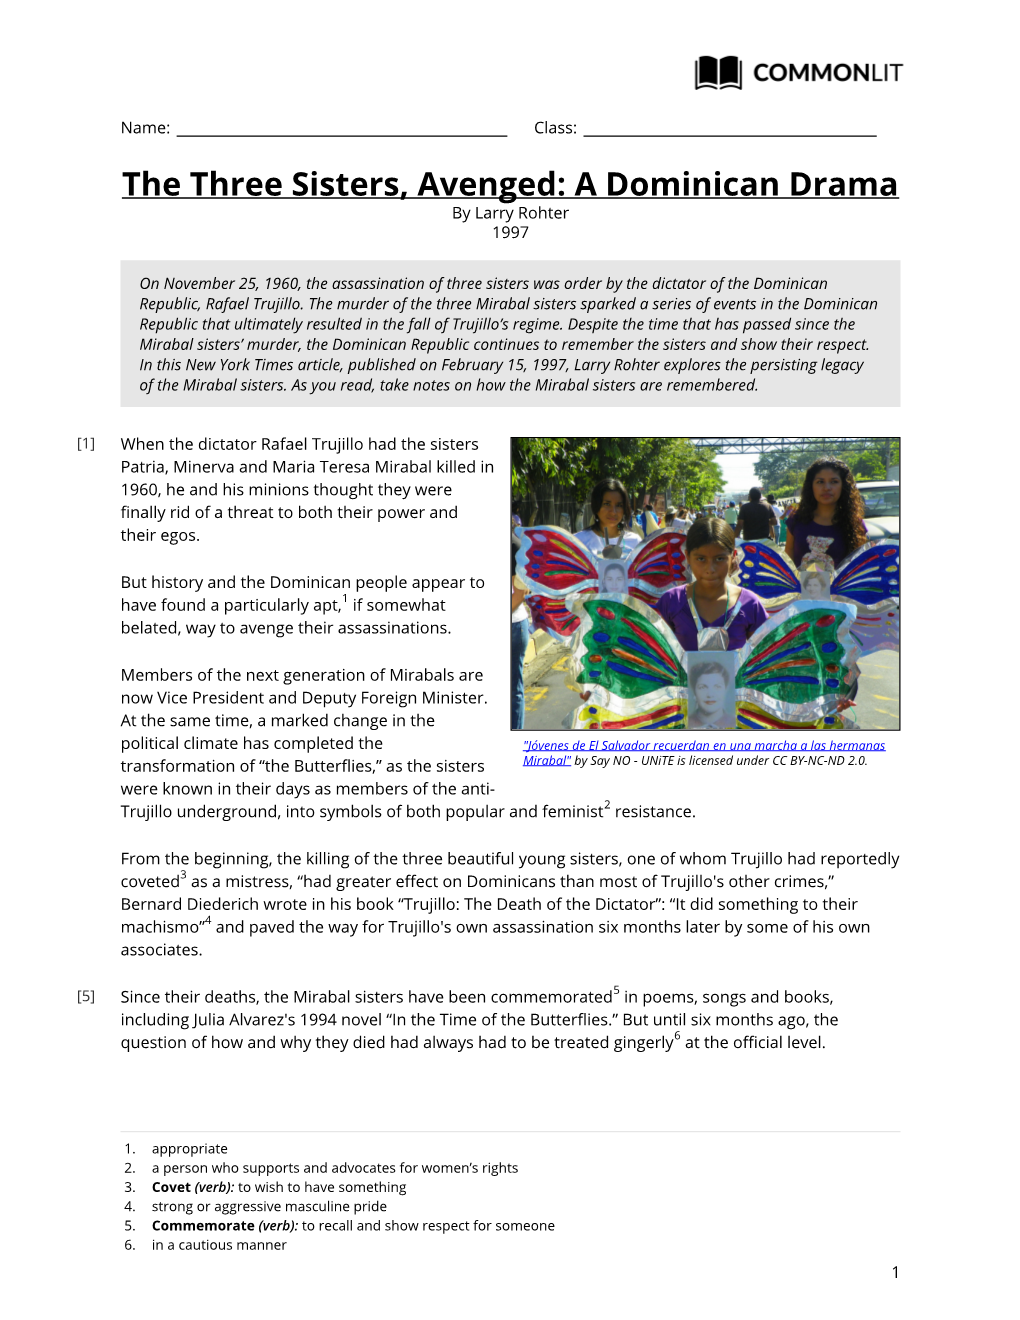 Commonlit | the Three Sisters, Avenged: a Dominican Drama